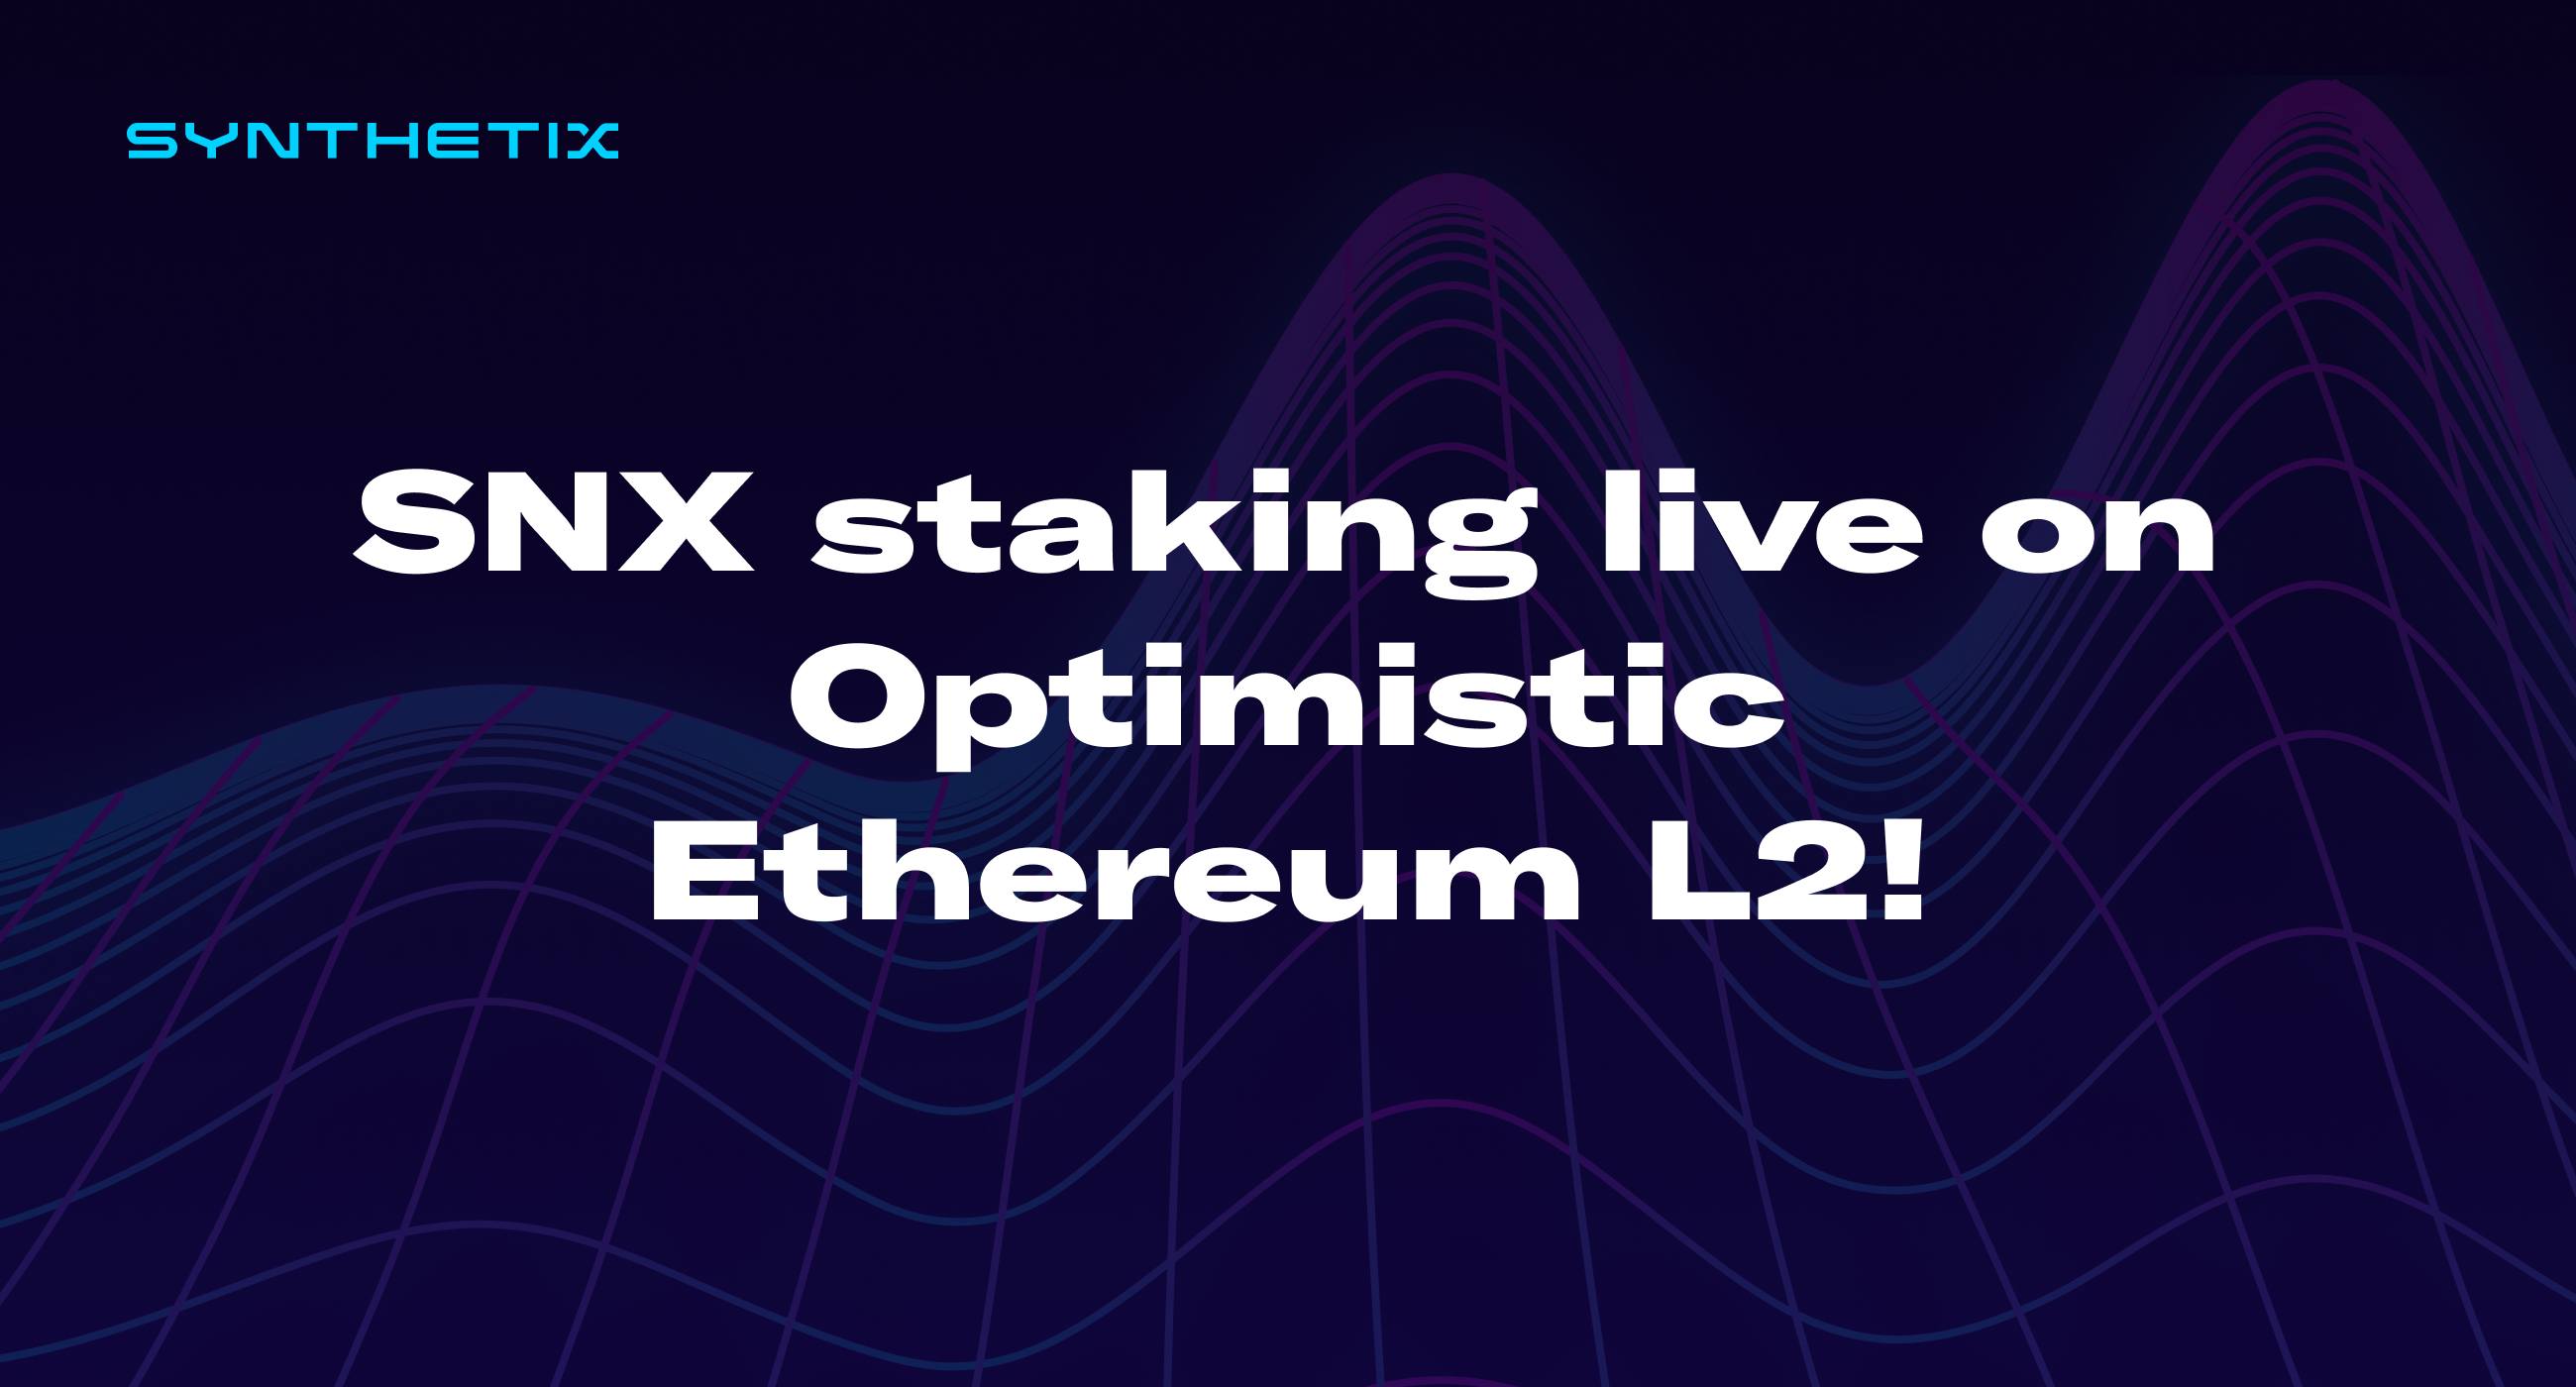 SNX staking live on Optimistic Ethereum L2!